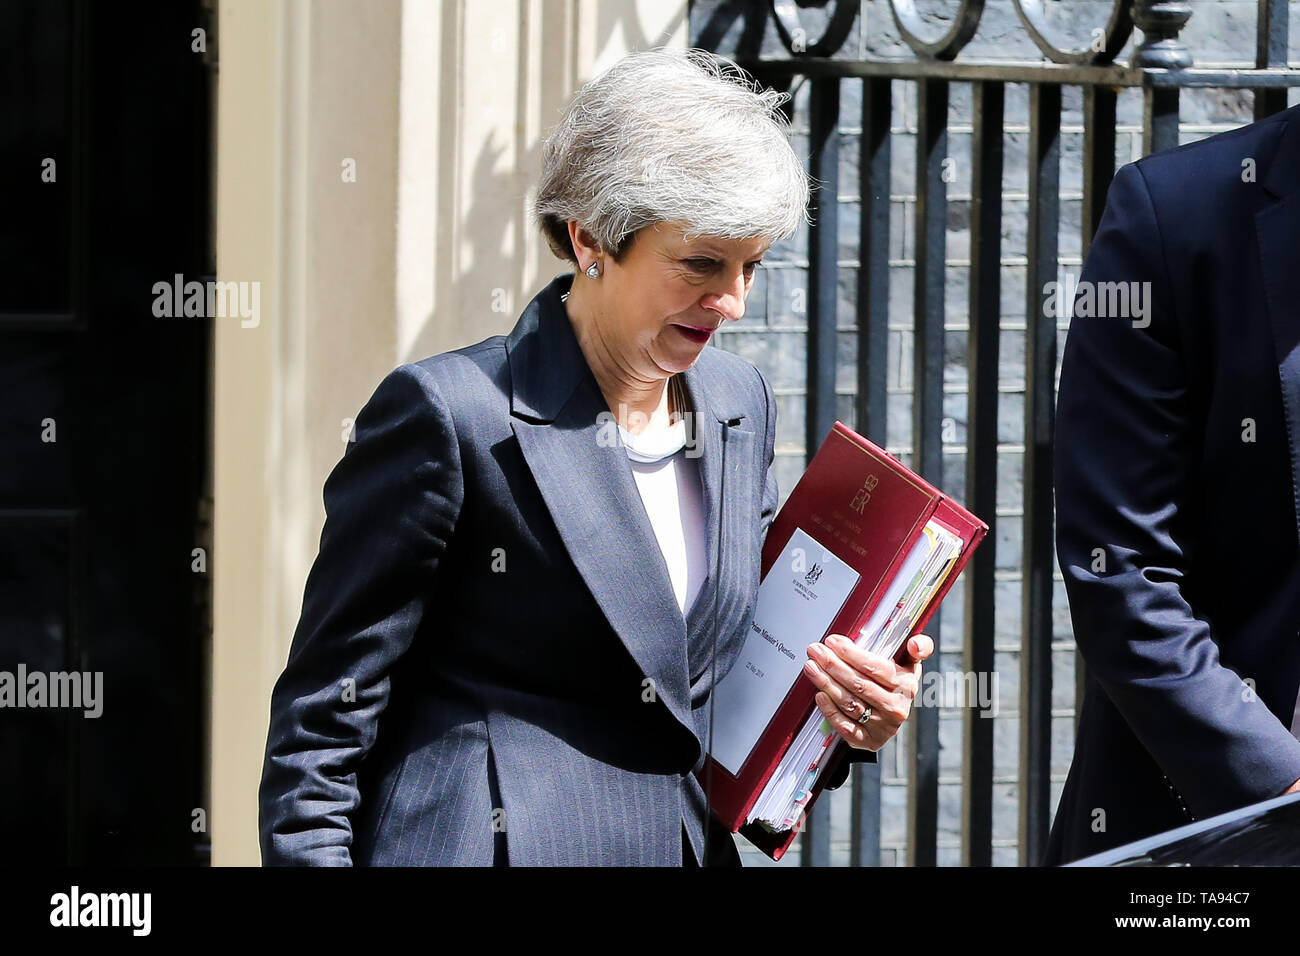 British Prime Minister Theresa May is seen departing from Number 10 Downing Street to attend Prime Minister's Questions (PMQs) in the House of Commons on the eve of European Parliament elections. Stock Photo